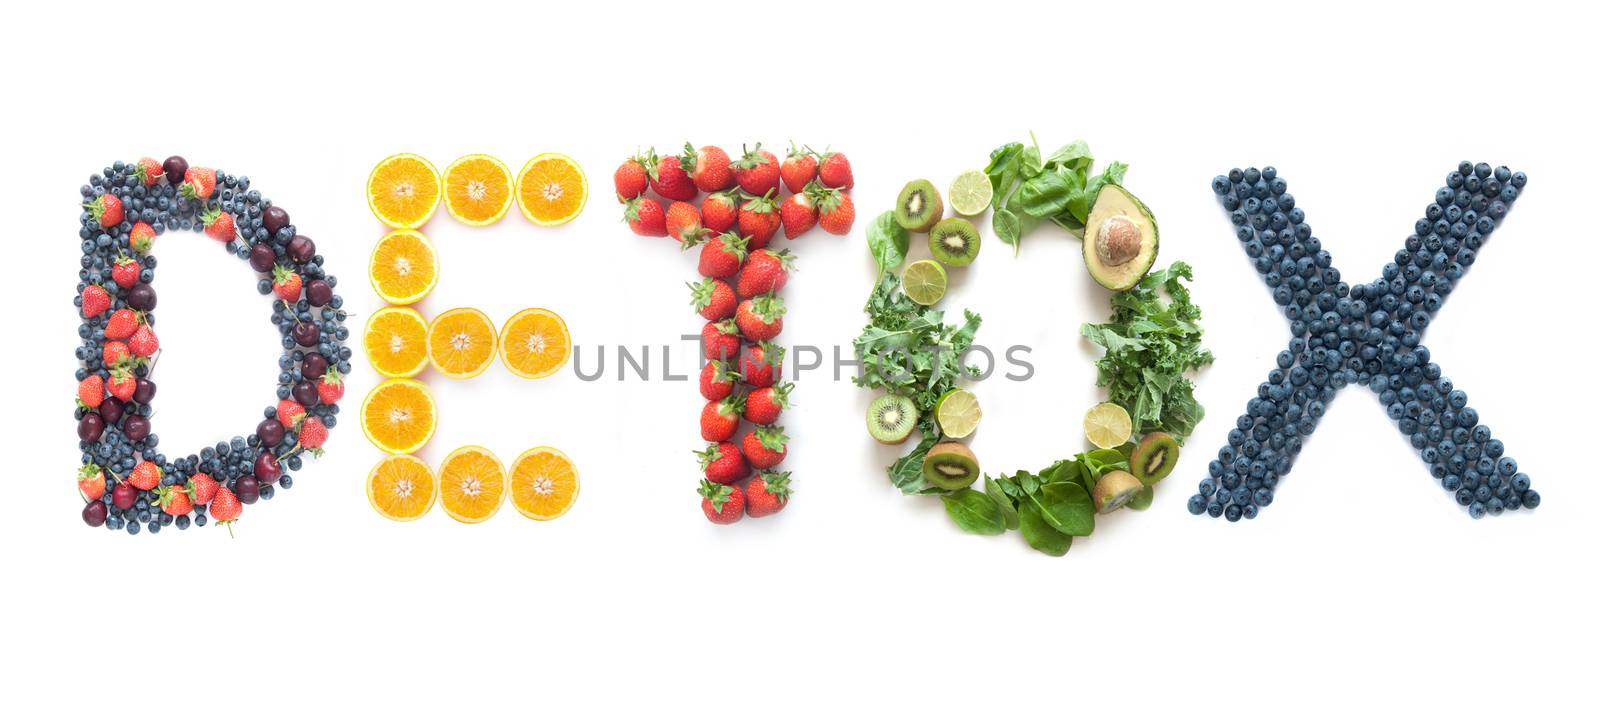 Detox word made from fruits and vegetables by unikpix